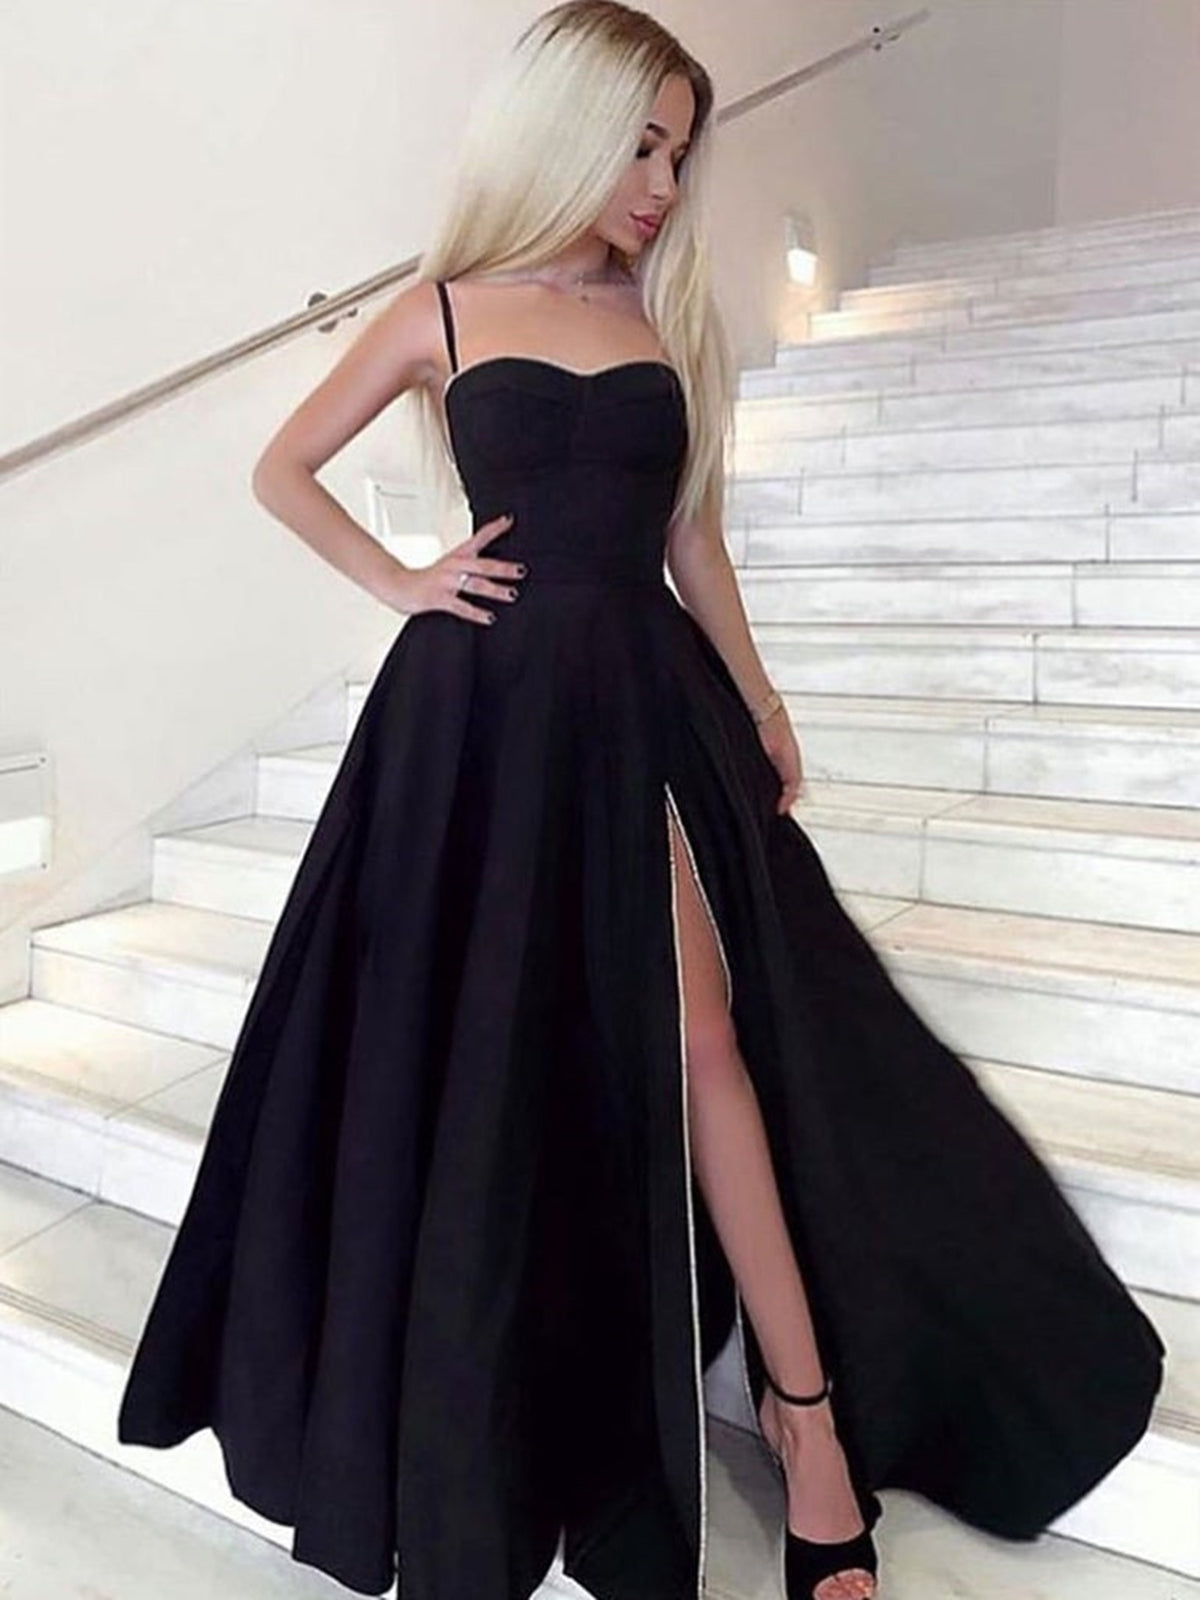 Tulle Floor-length A Line Long Sleeve Romantic Formal Dress with Appliques  and Lace | Prom dresses long with sleeves, Long sleeve prom, Prom dresses  with sleeves